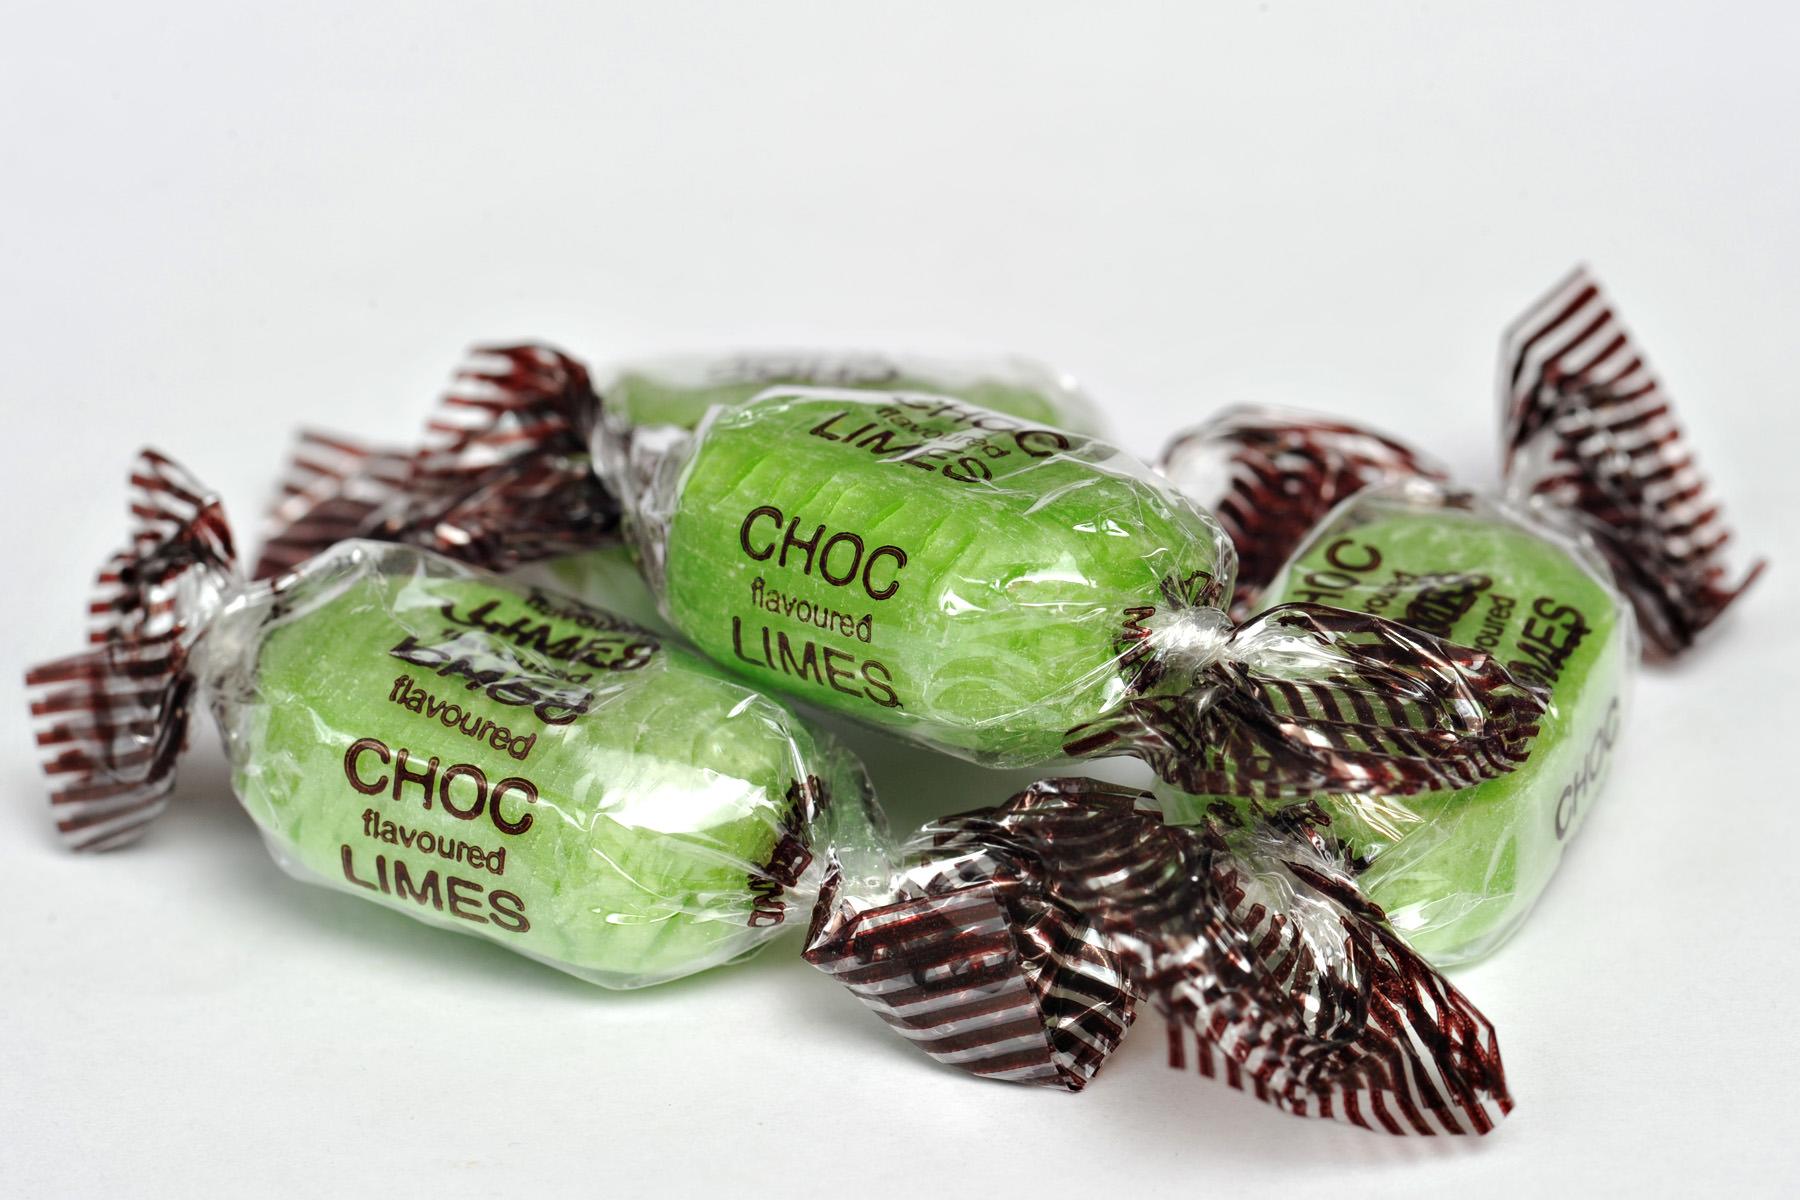 Chocolate Limes are a sweet from the 80s